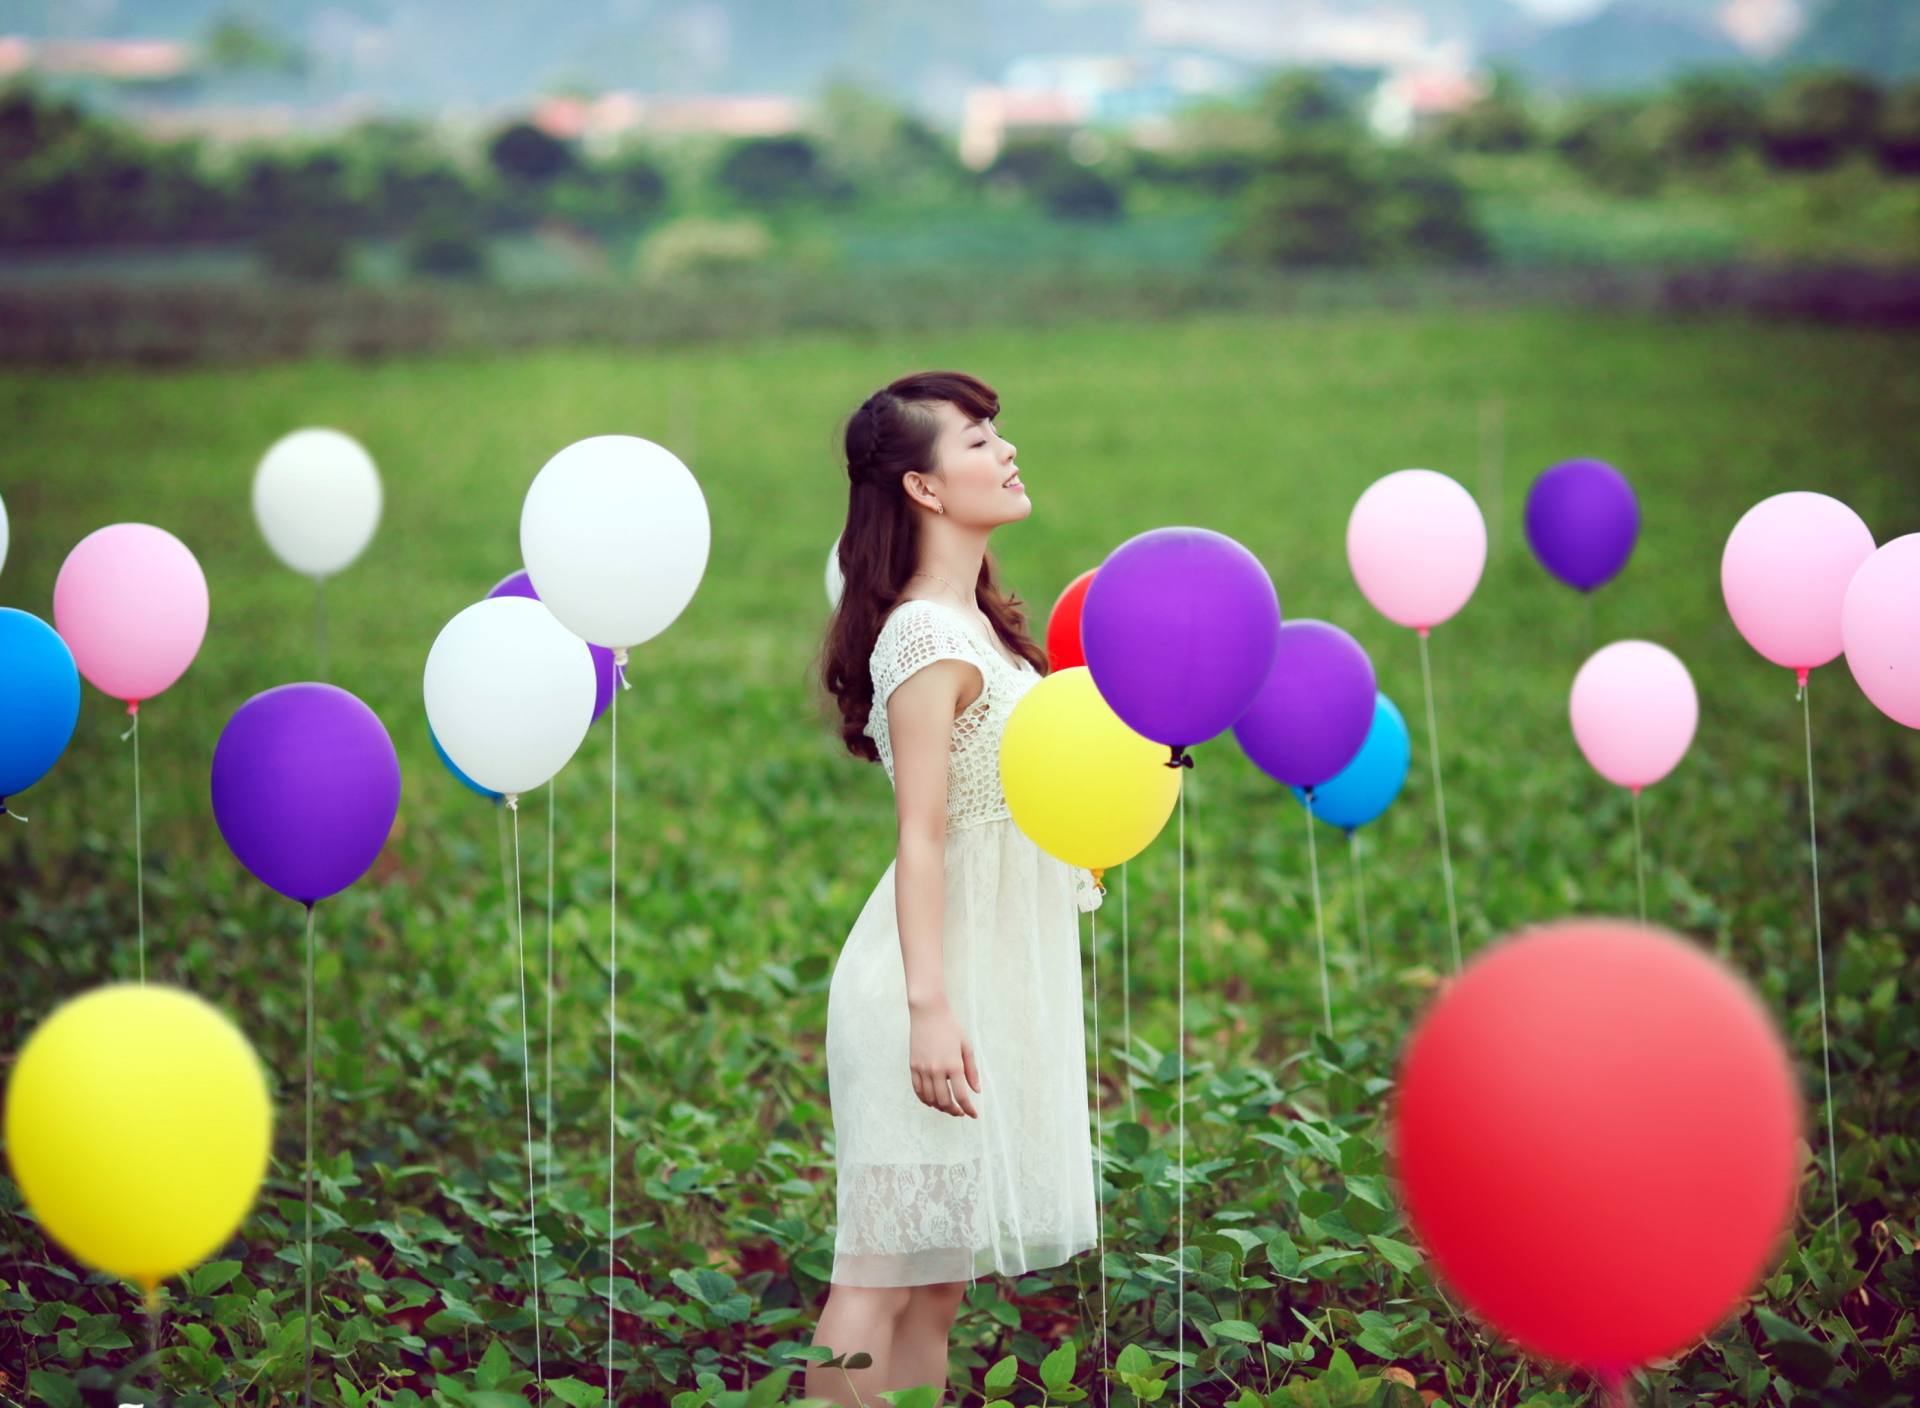 Girl And Colorful Balloons wallpaper 1920x1408